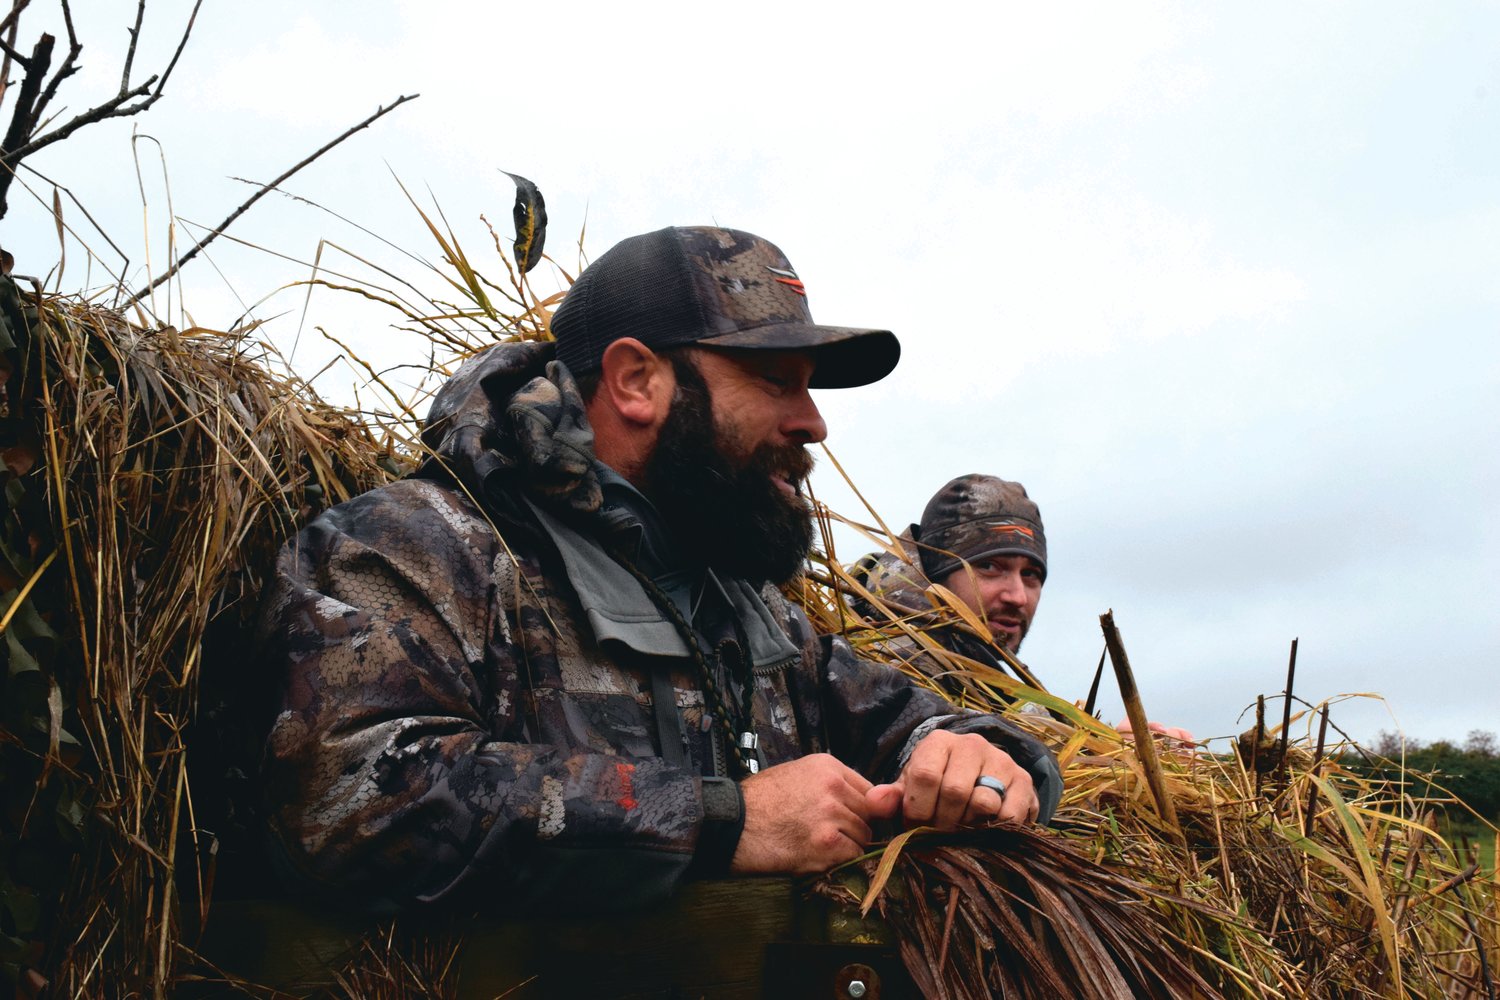 The Fallen Outdoors president Branden Trager, left, and member Josh James sit in a blind at the Ridgefield National Wildlife Refuge during a Veterans Day hunt on Nov. 11.